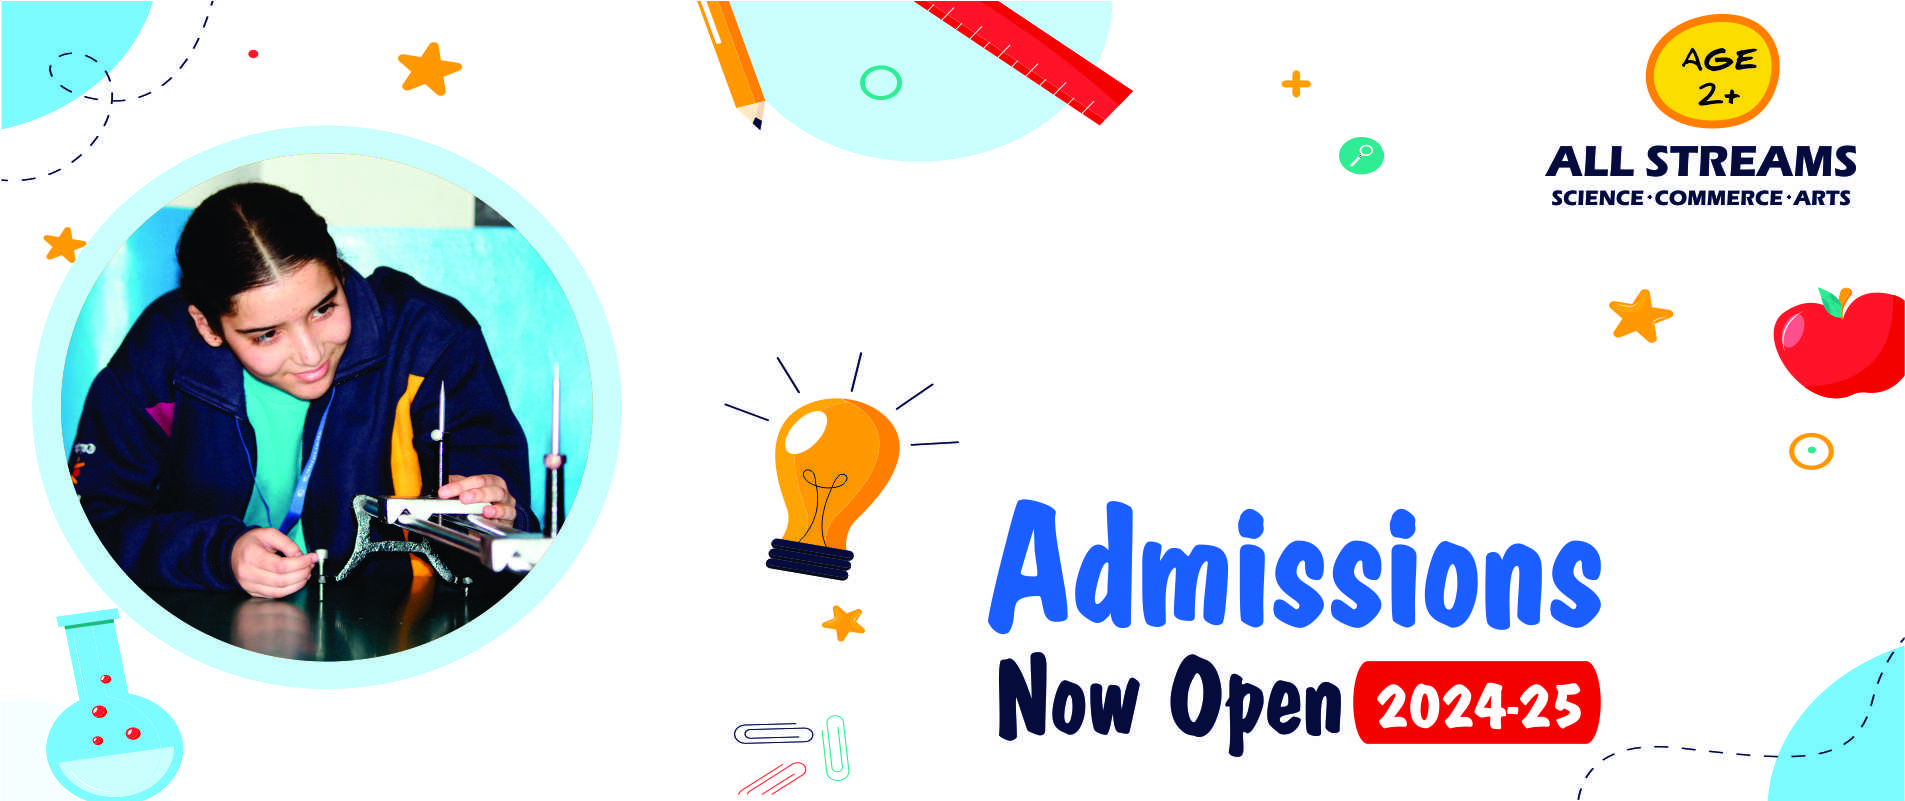  Admissions Open 2024-25